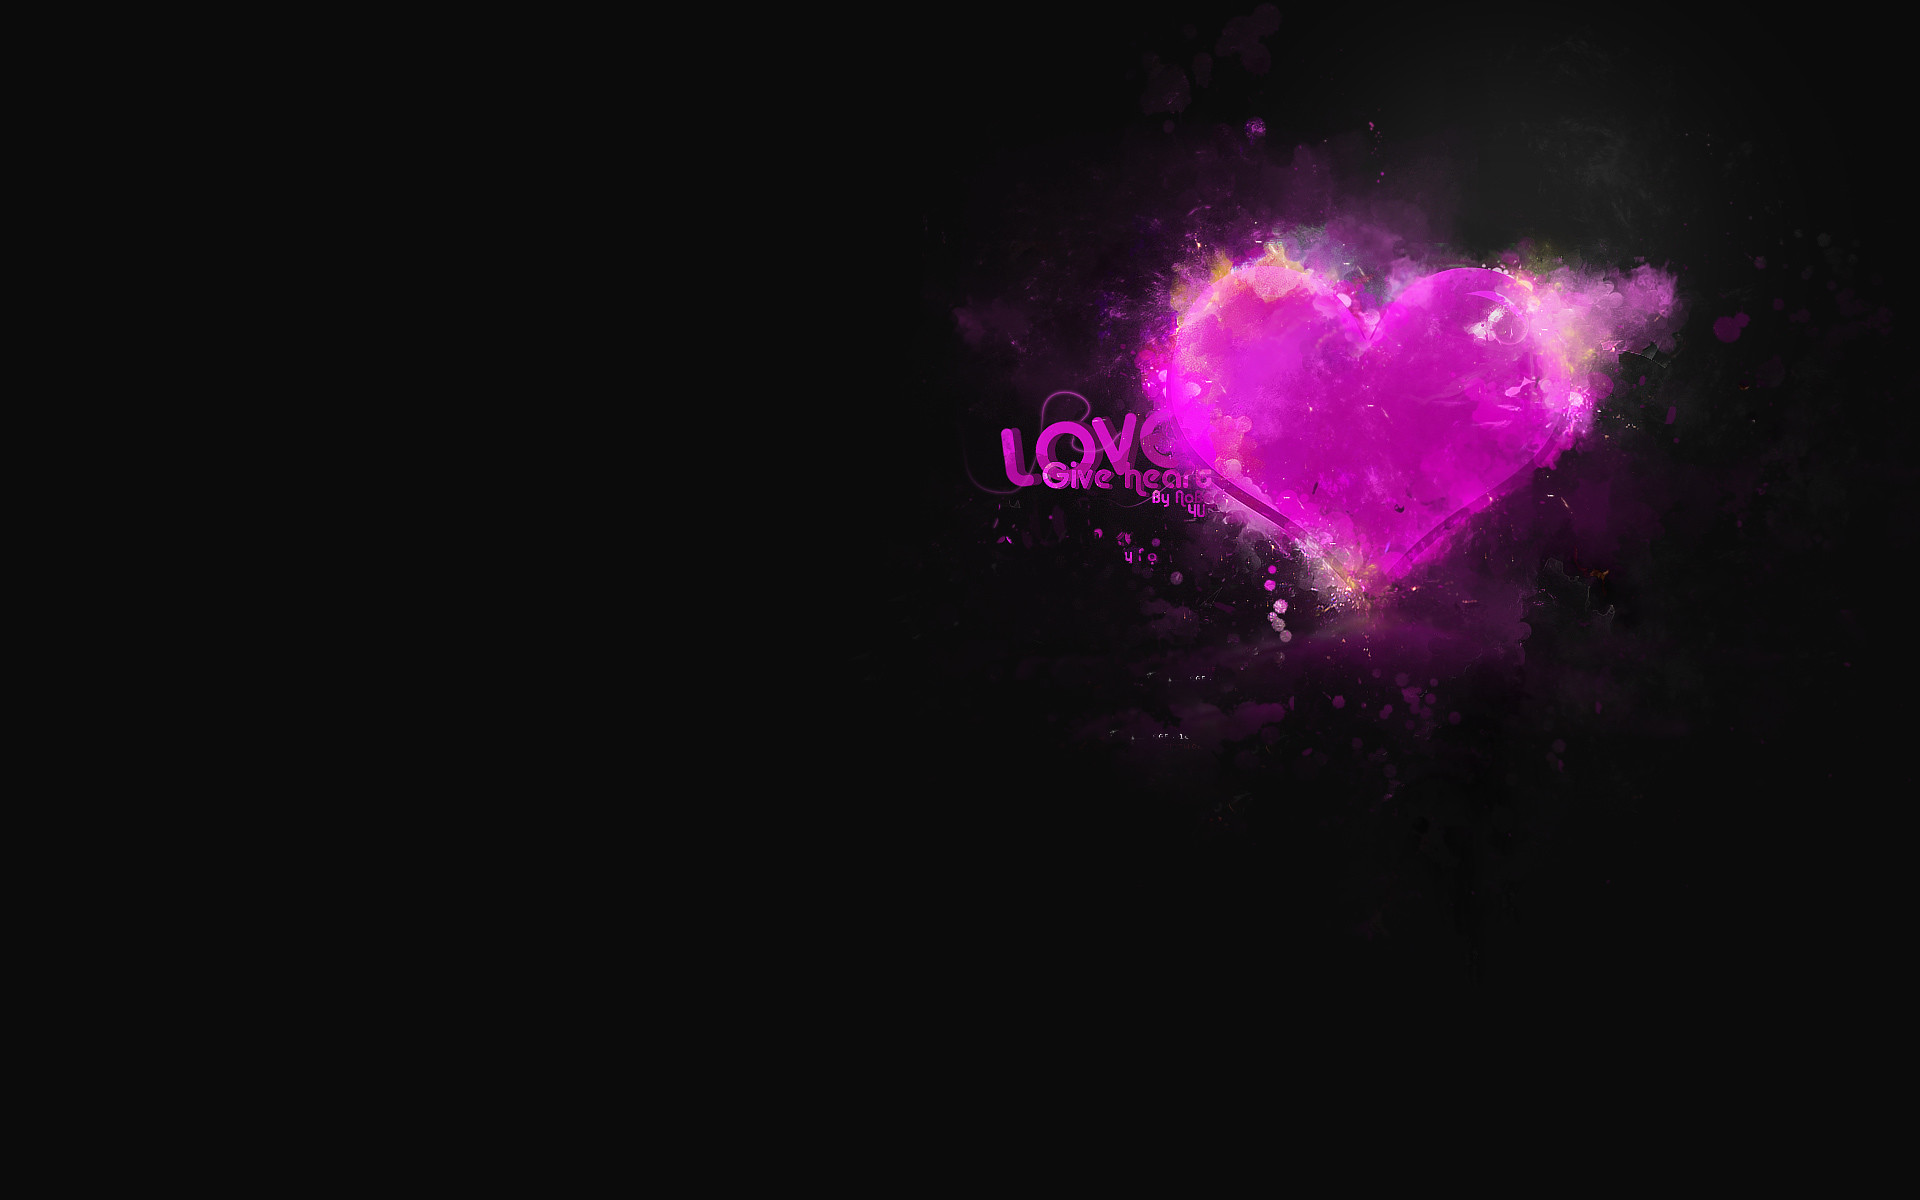 1920x1200 purple heart x 1600 px] - Love/Hearts - Pictures and wallpapers